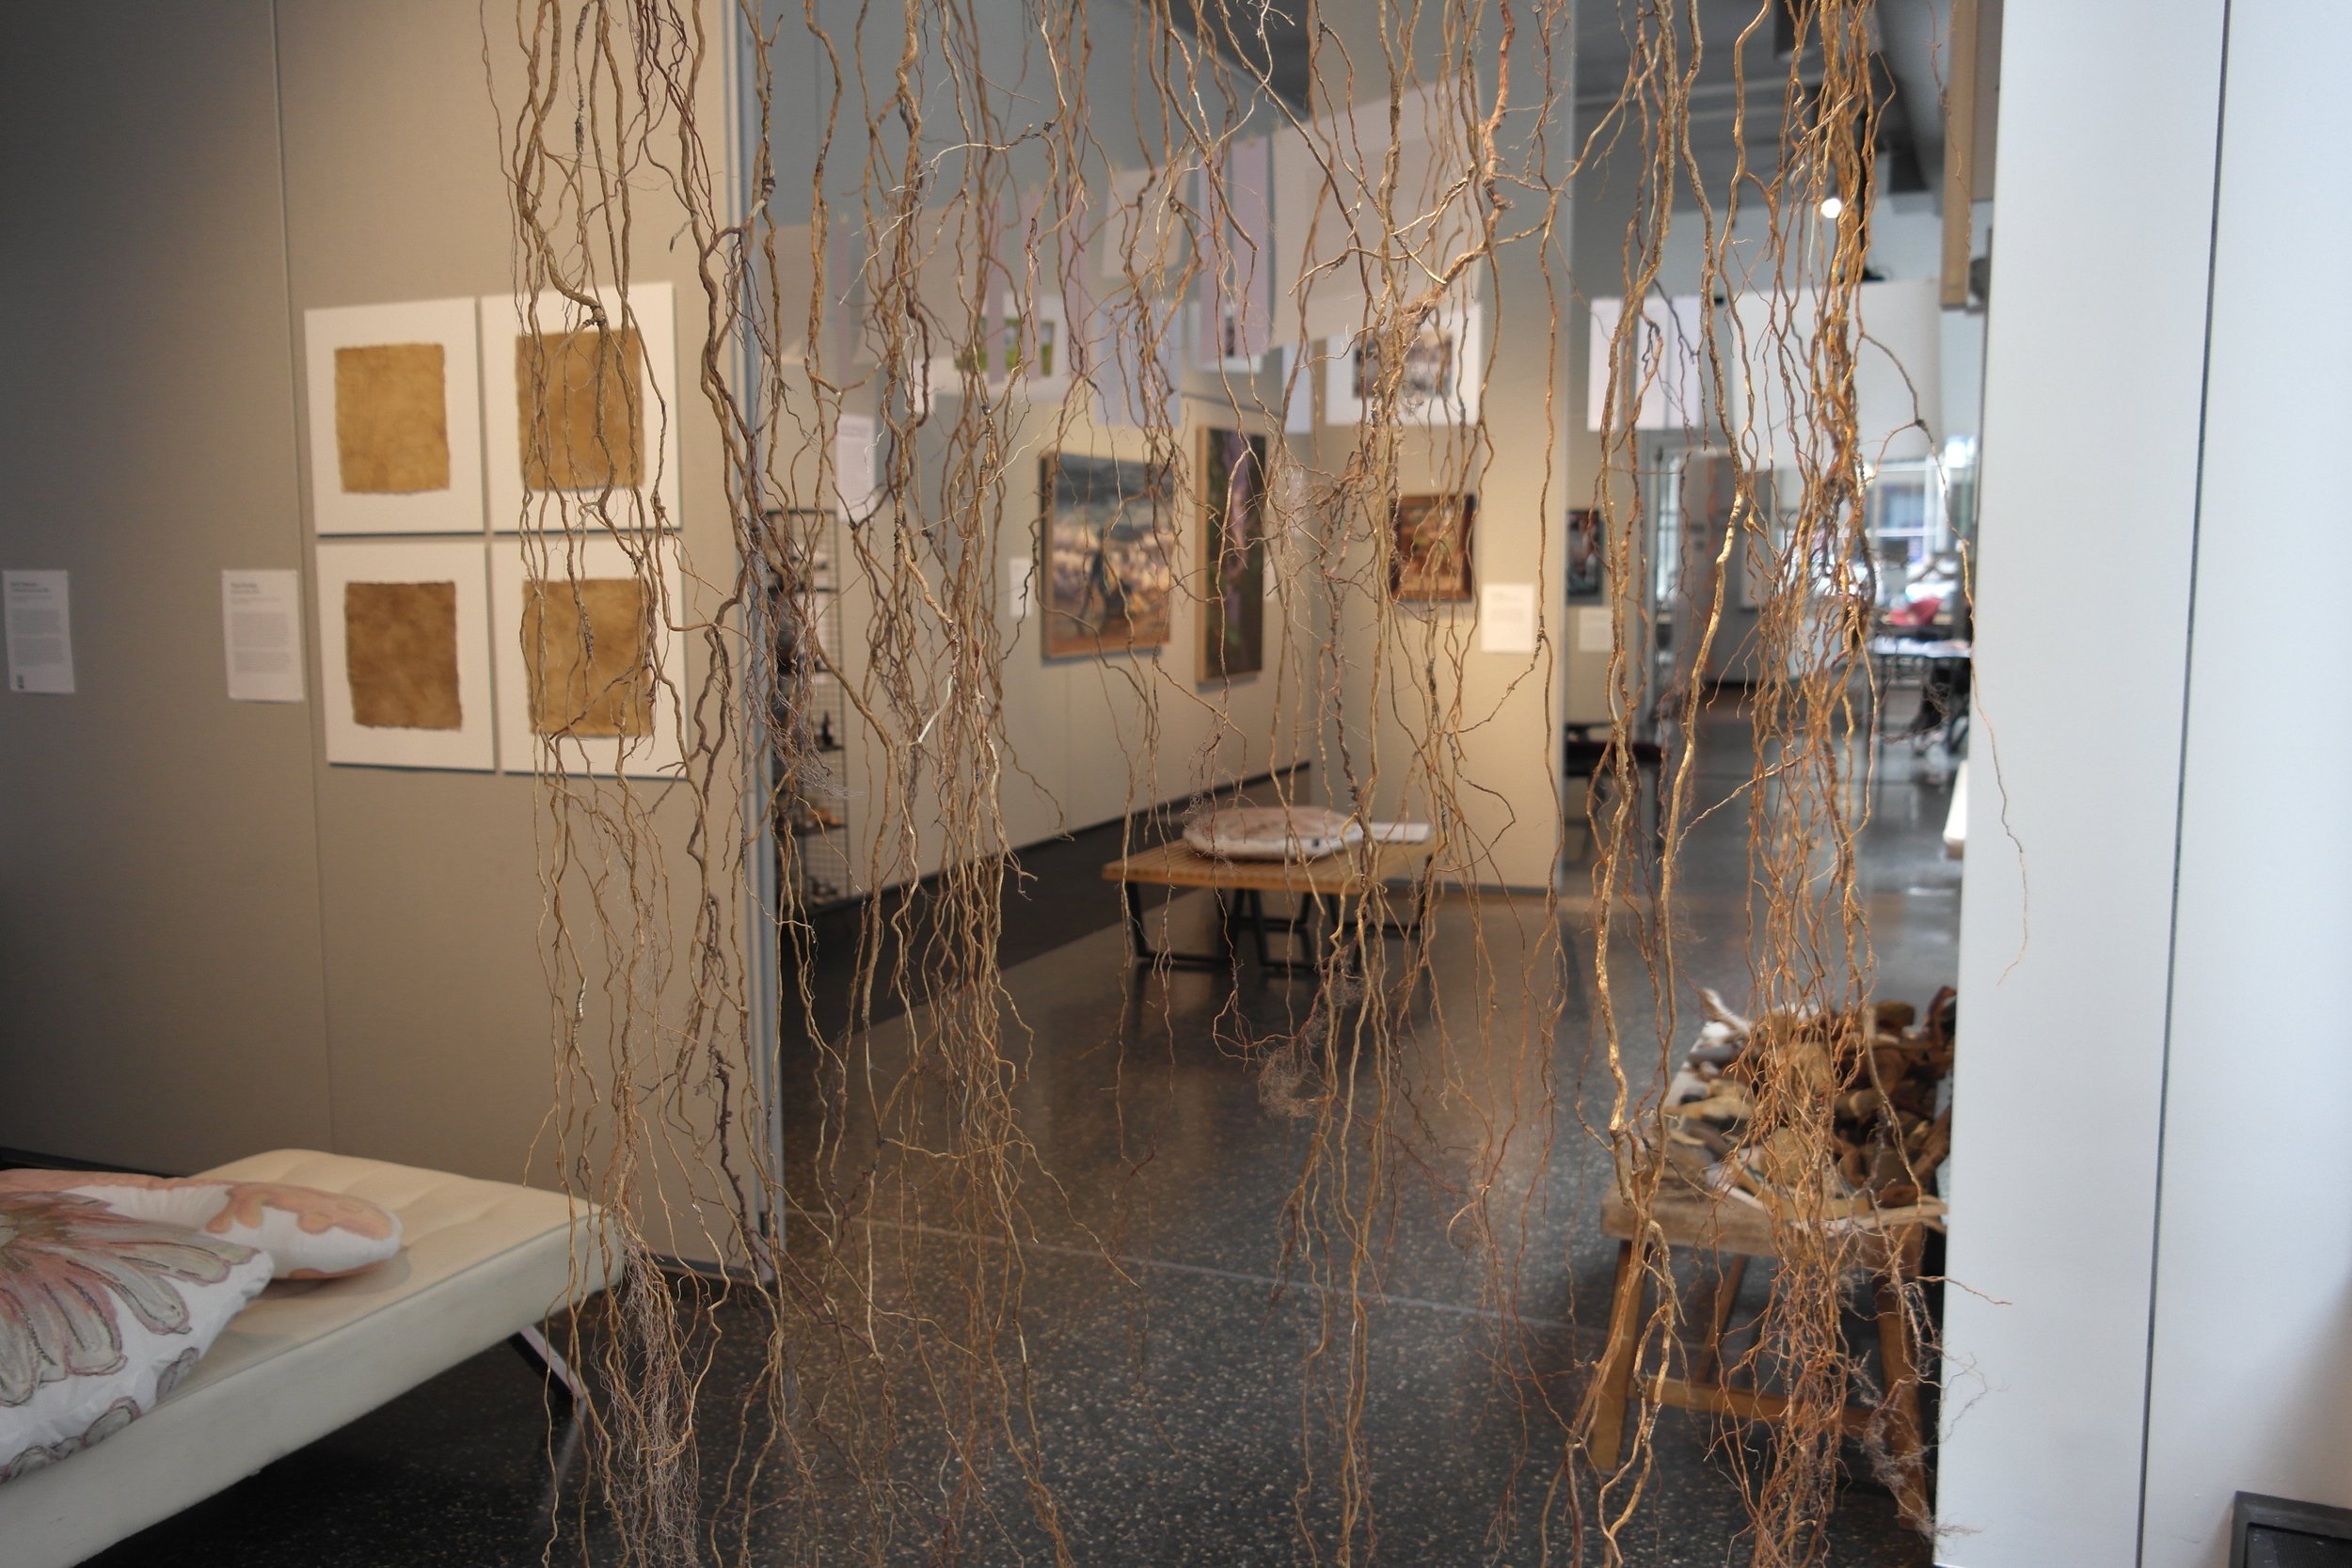 Gallery view with work by Tessa Grundon (Invasive Species and Contours) and David Nasca. 